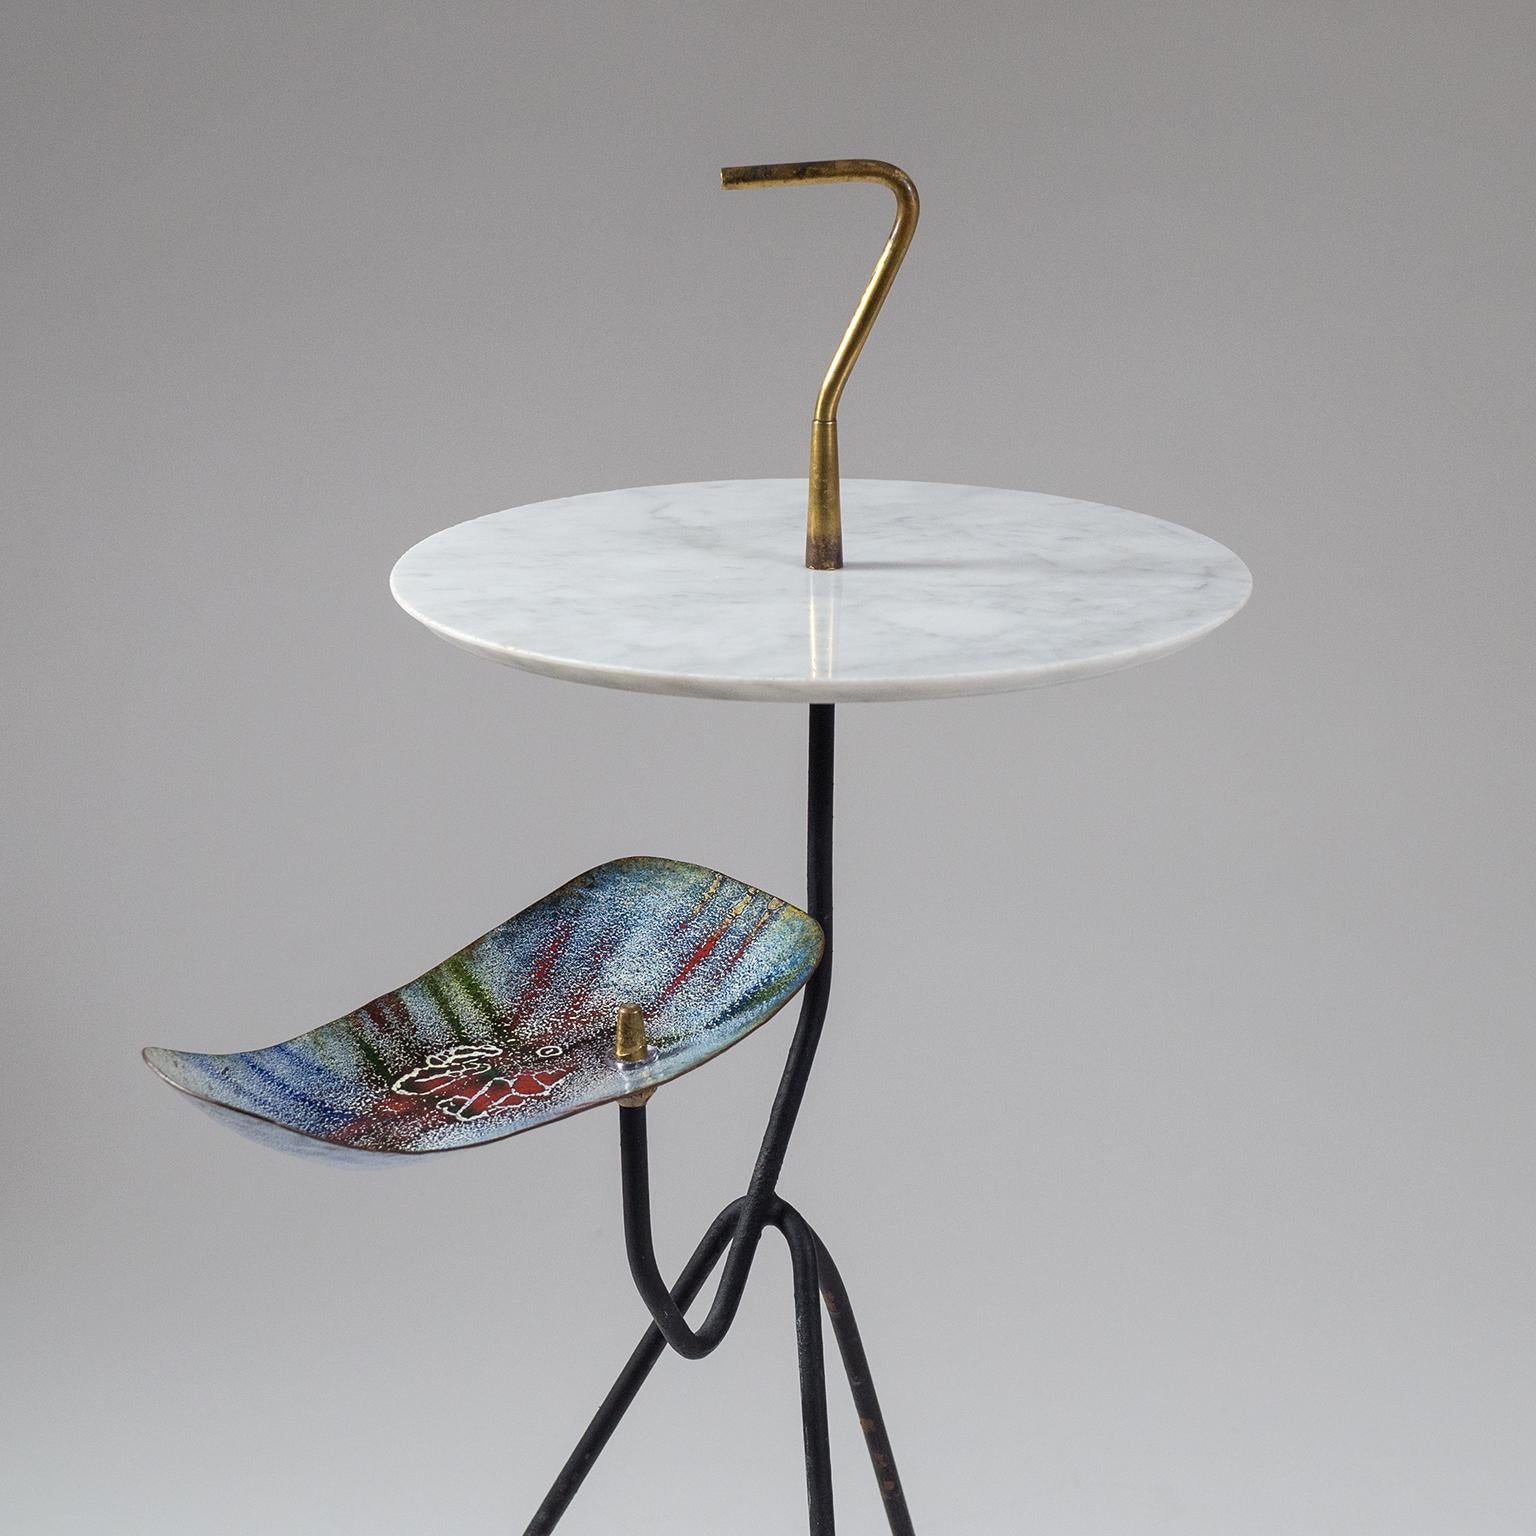 Carrara Marble Sculptural Italian Side Table, 1950s, Marble, Brass and Enameled Copper